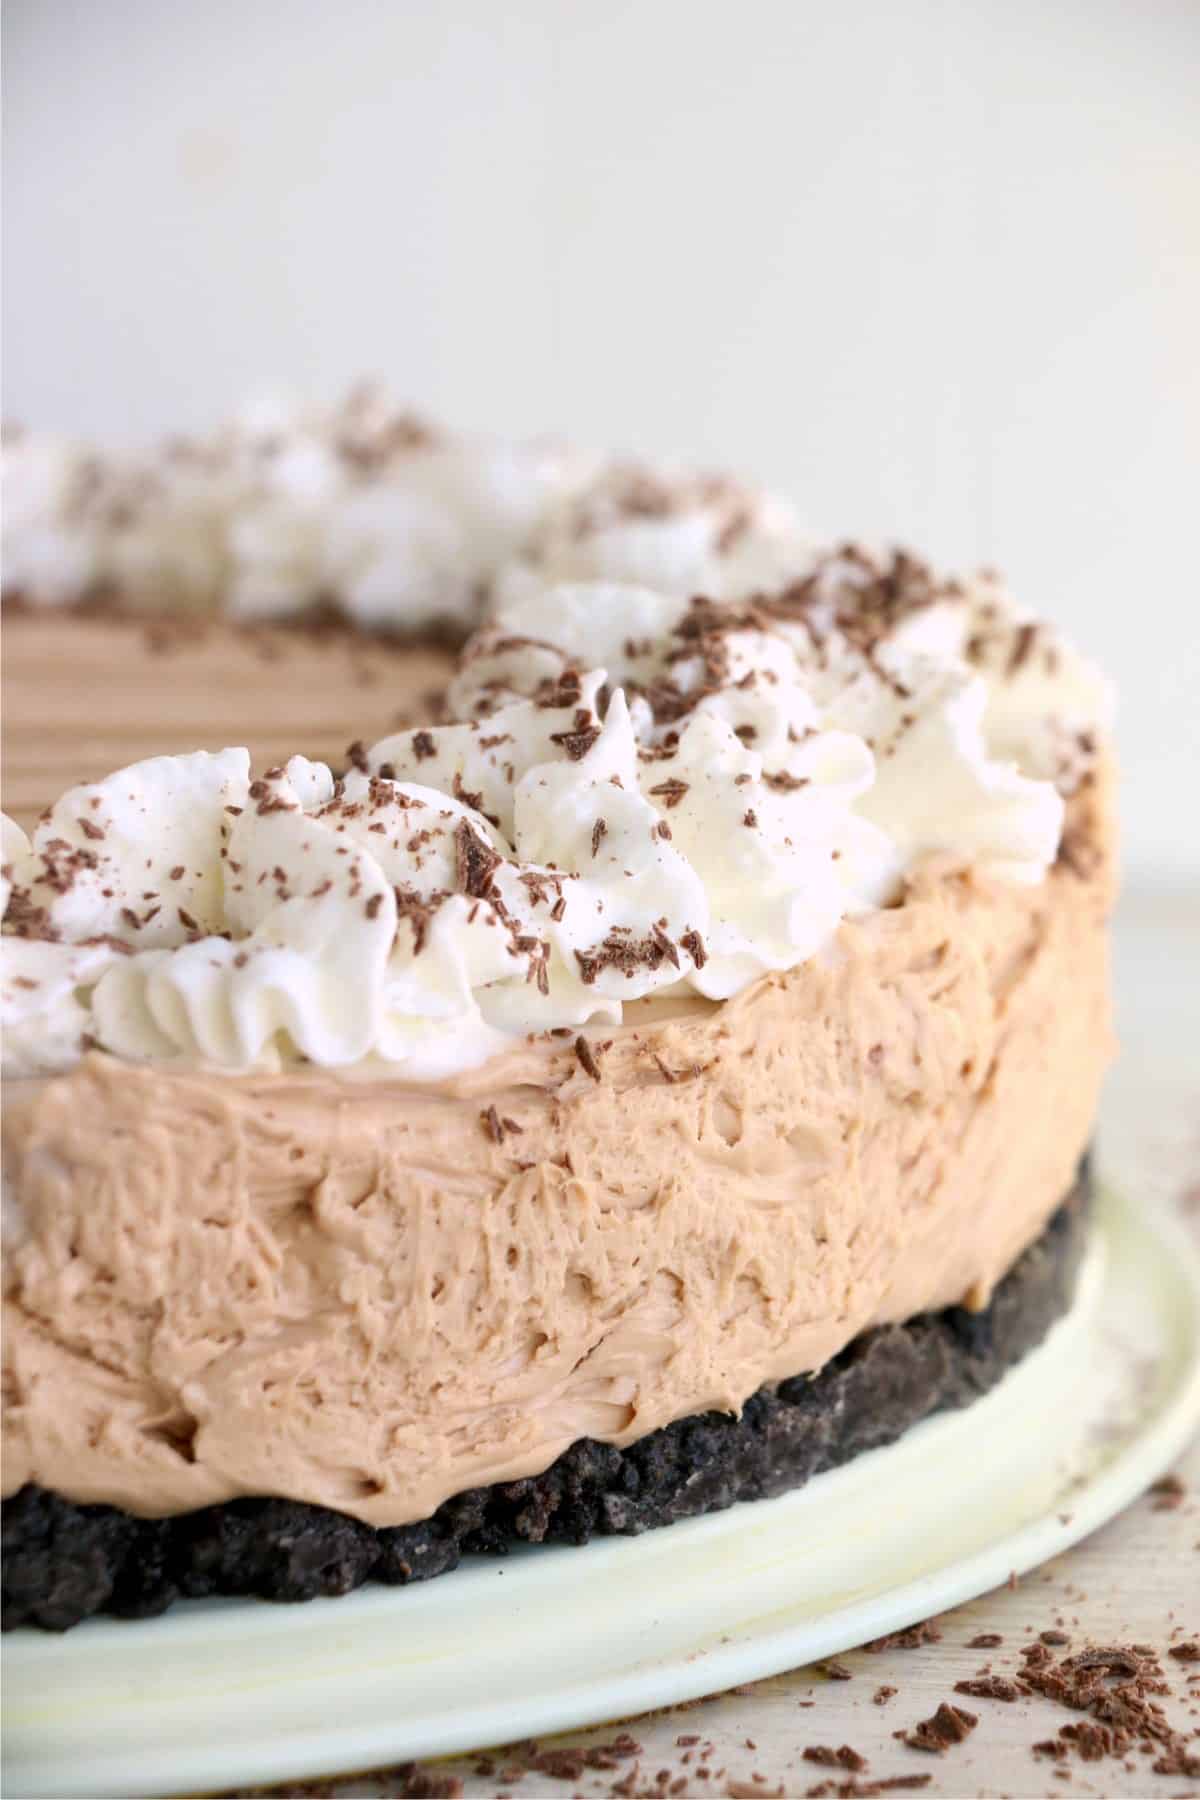 Closeup shot of Kahlua chocolate cheesecake decorated with whipped cream and shaved chocolate